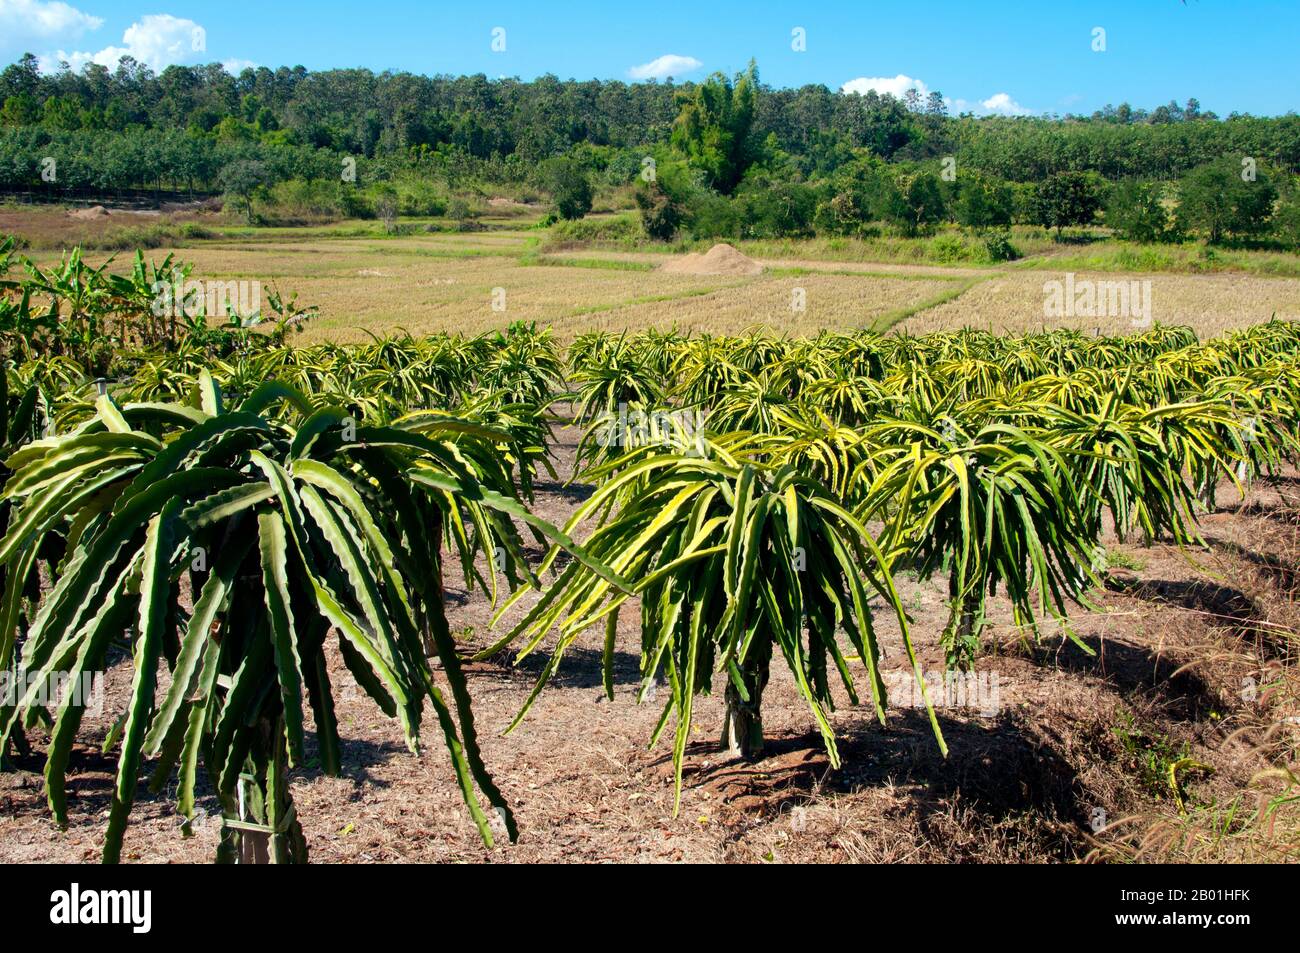 Thailand: Aloe vera plantation, Loei Province.  Loei (Thai: เลย) Province is located in Thailand's upper North-East. Neighboring provinces are (from east clockwise) Nong Khai, Udon Thani, Nongbua Lamphu, Khon Kaen, Phetchabun, Phitsanulok. In the north it borders Xaignabouli and Vientiane Provinces of Laos.  The province is covered with low mountains, while the capital Loei is located in a fertile basin. The Loei River, which flows through the province, is a tributary of the Mekong which, together with the smaller Hueang River, forms the northern boundary of the province with neighboring Laos. Stock Photo